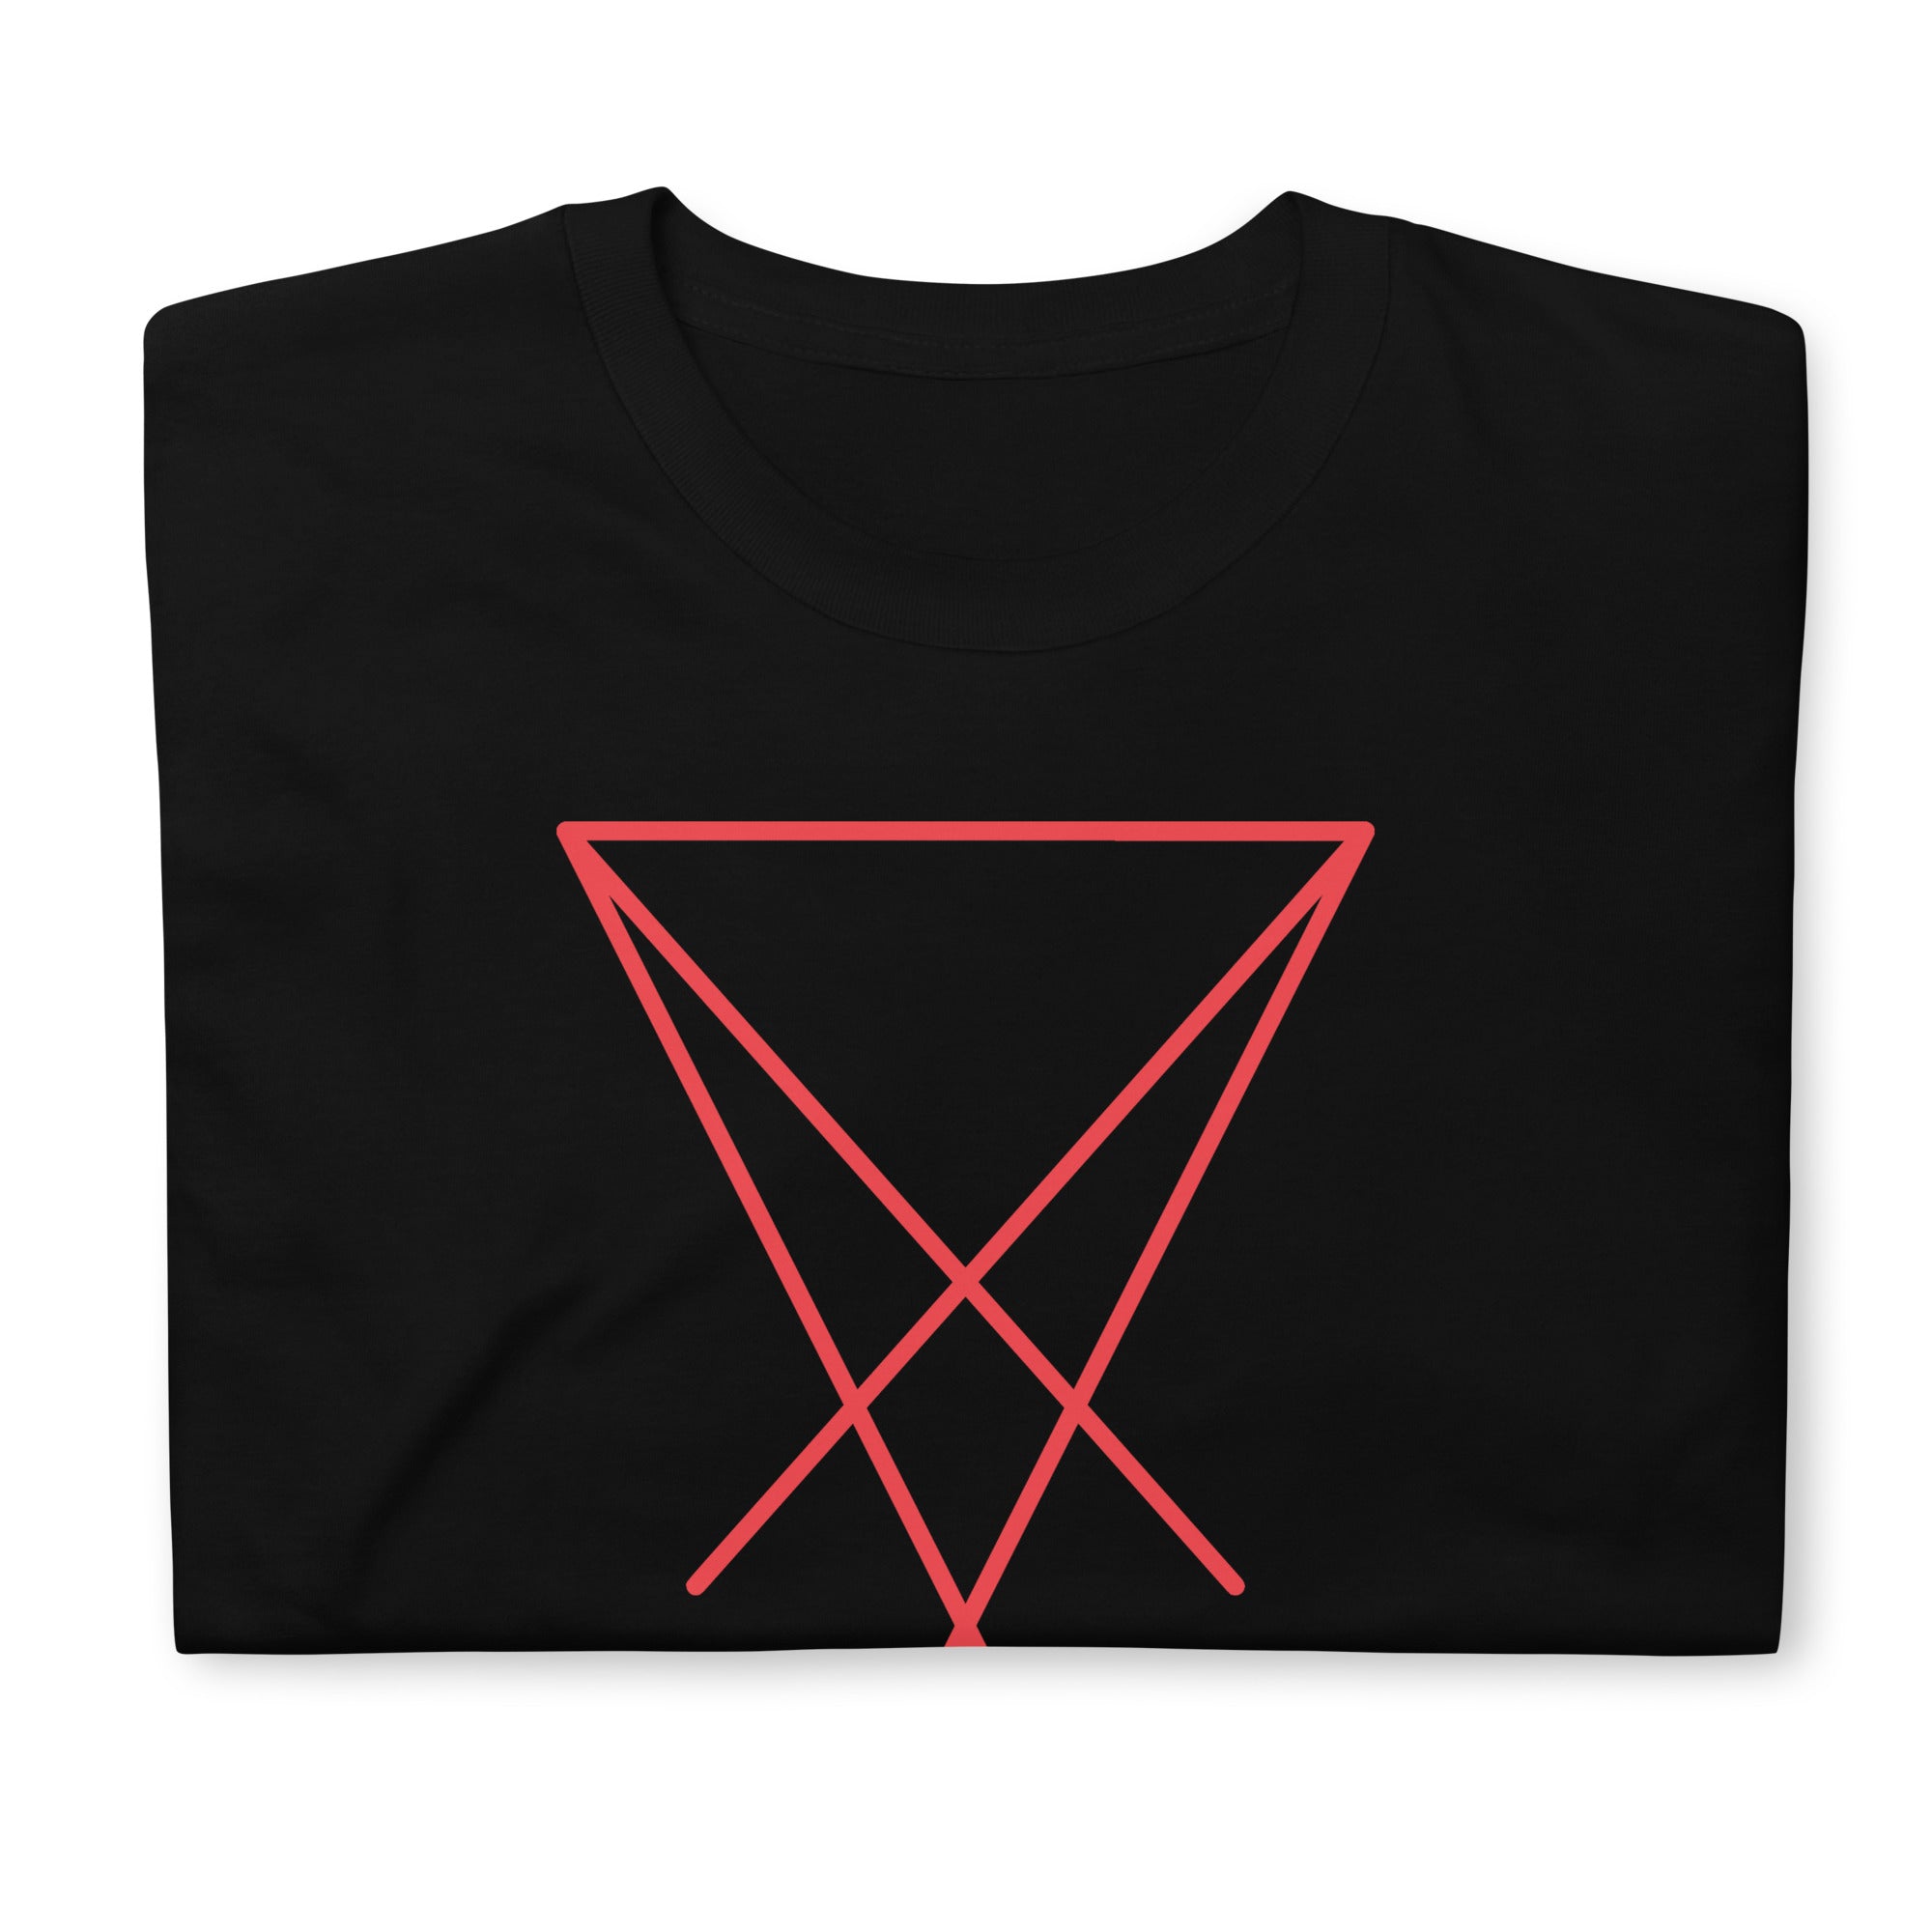 Red Sigil of Lucifer (Seal of Satan) The Grimoire of Truth Men's Short-Sleeve T-Shirt - Edge of Life Designs